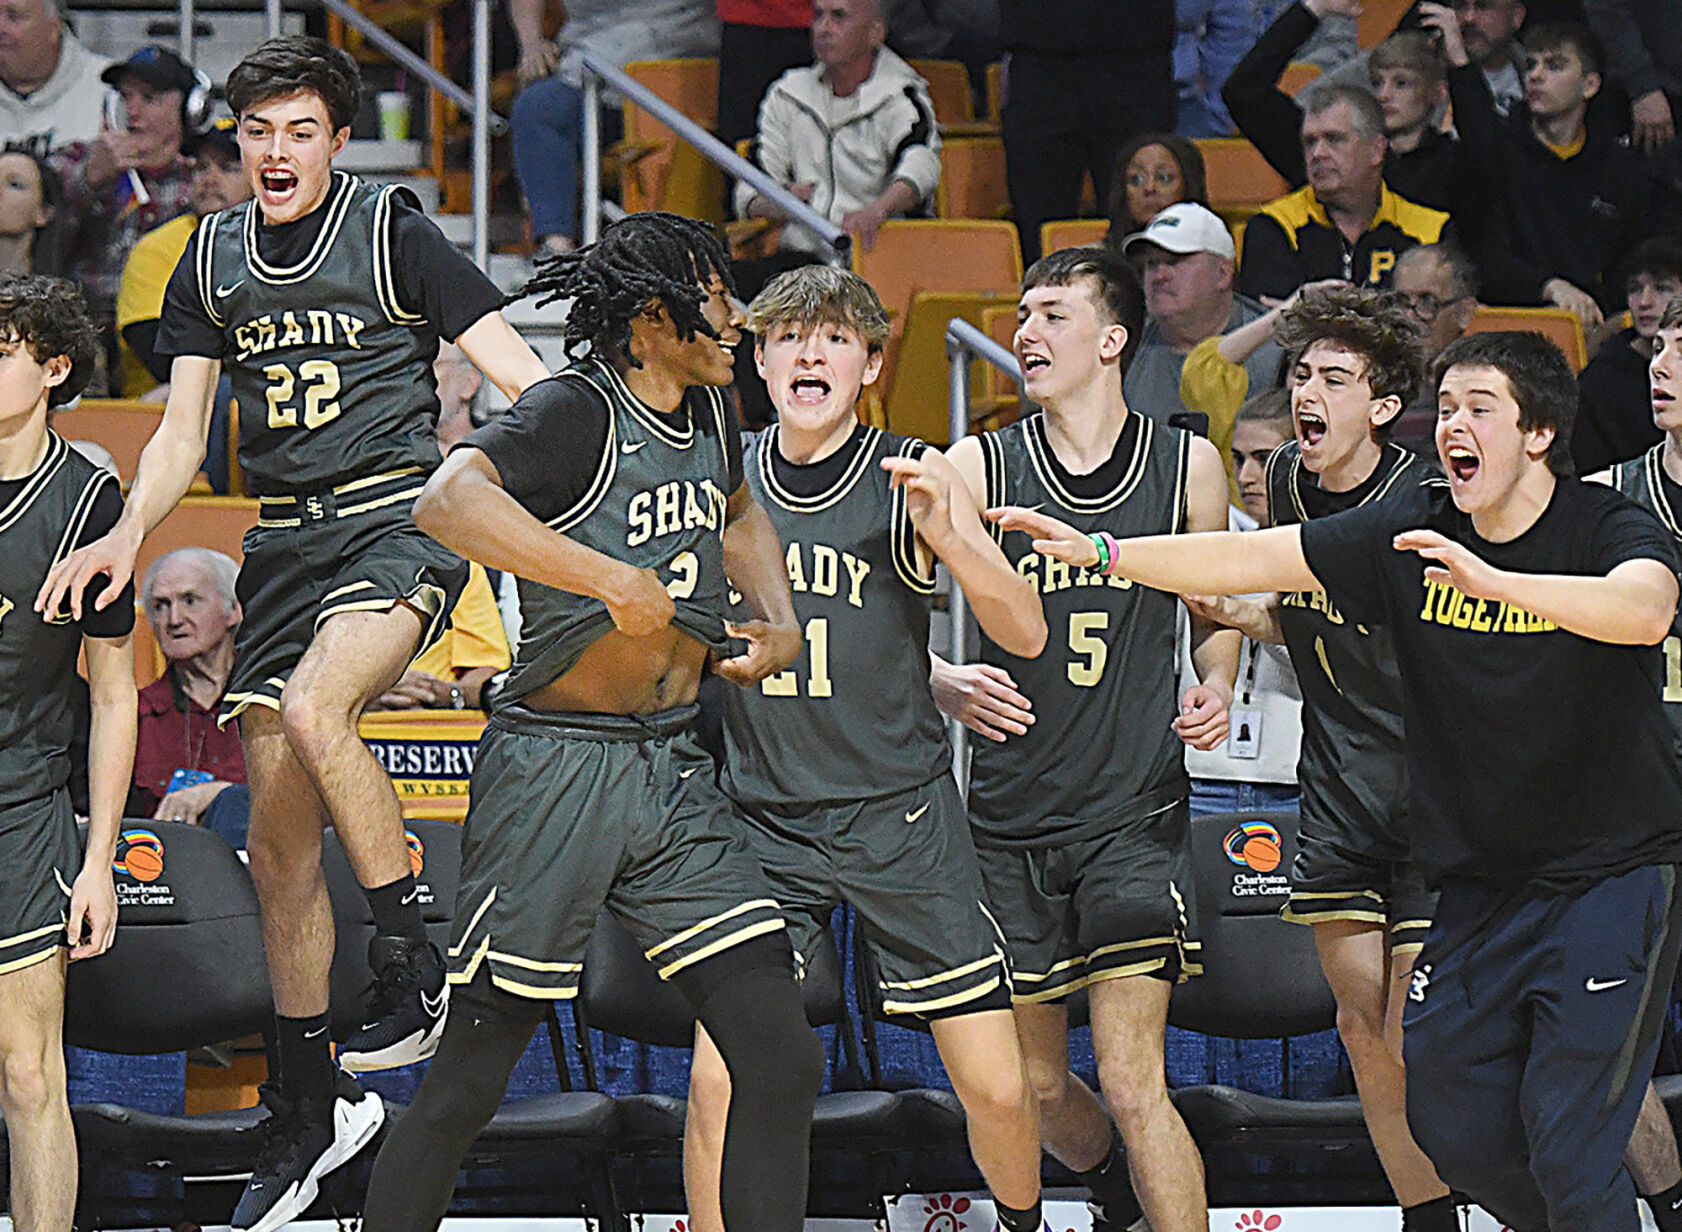 Shady Spring’s Vengeance: Ammar Maxwell Leads Team to Overtime Victory in State Championship